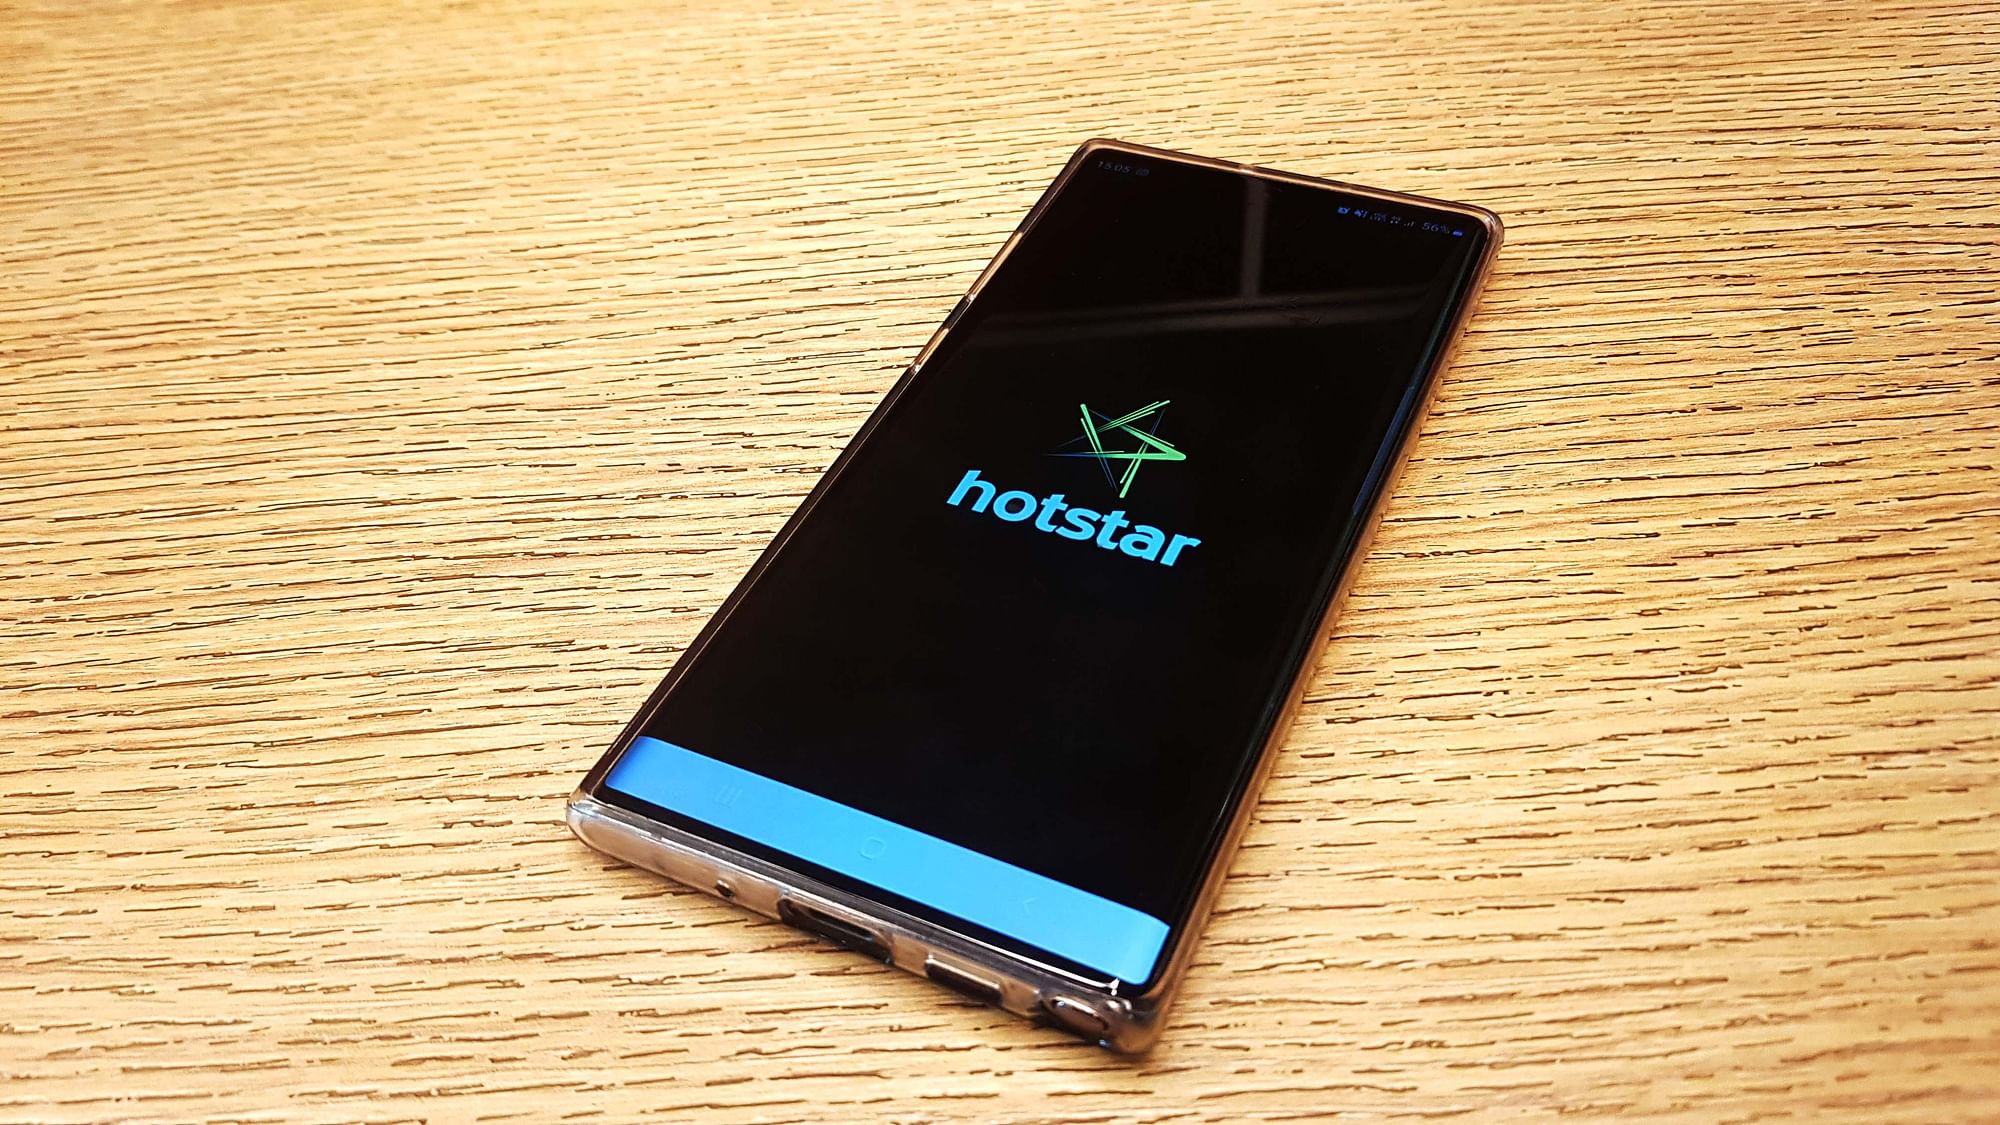 Hotstar is one of the most downloaded OTT apps in India with more than 400 million installs.